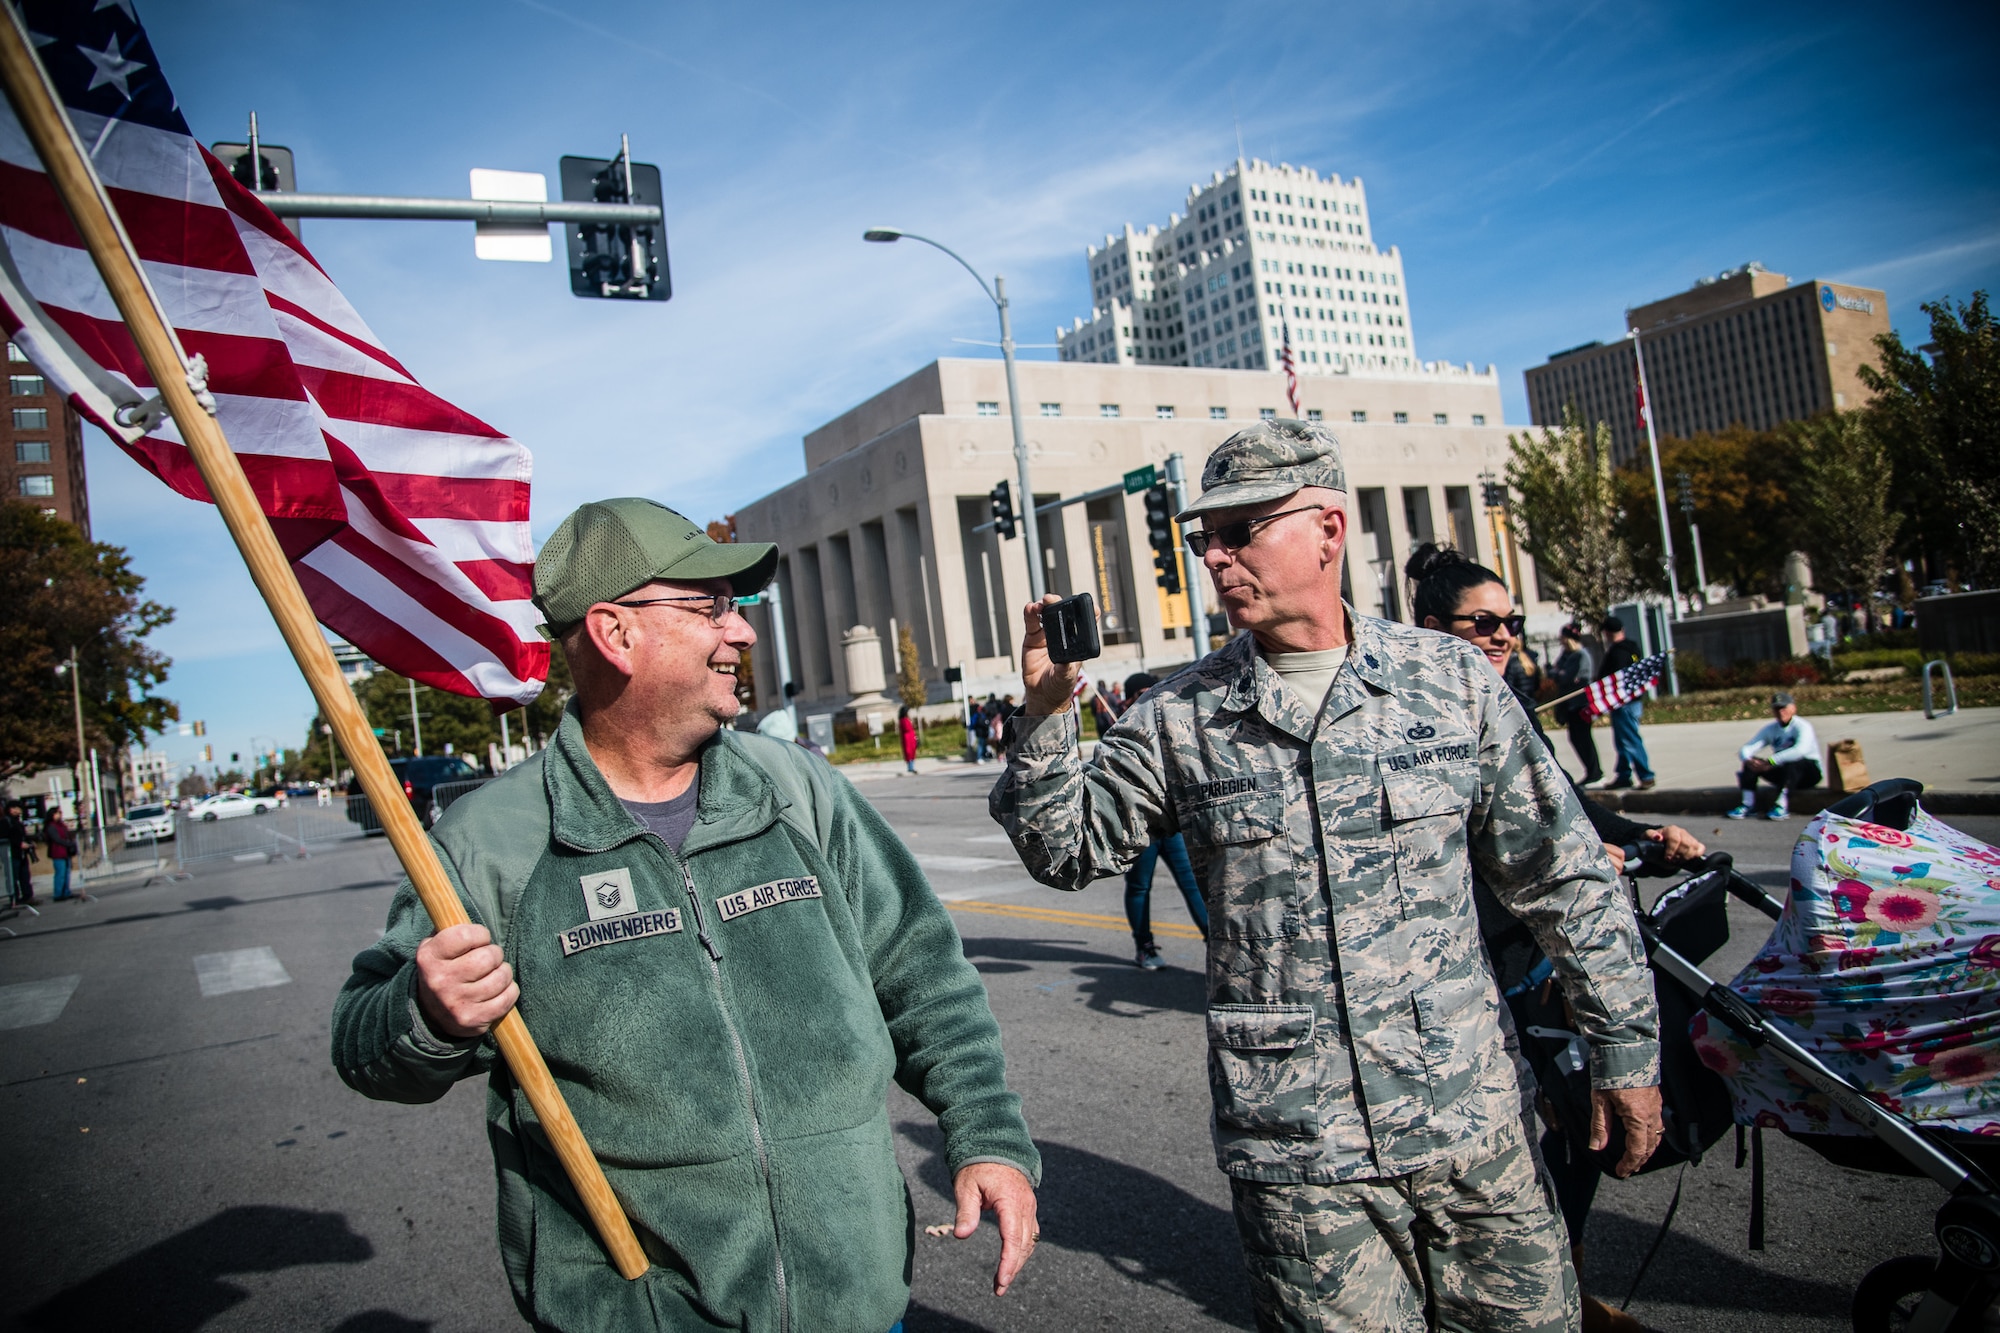 Lt. Col. Stan Paregien, 932nd Airlift Wing public affairs officer, right, takes video of former 932nd AW historian and now retired Master Sgt. Gerald Sonnenberg at the St. Louis Veterans Day Parade, downtown St. Louis, Missouri Nov. 9, 2019. Sonnenberg continues to support local parades as an attendee but he also crafted the various flags carried by the 932nd AW during parades to showcase various historical U.S. flags. (U.S. Air Force photo by Christopher Parr)